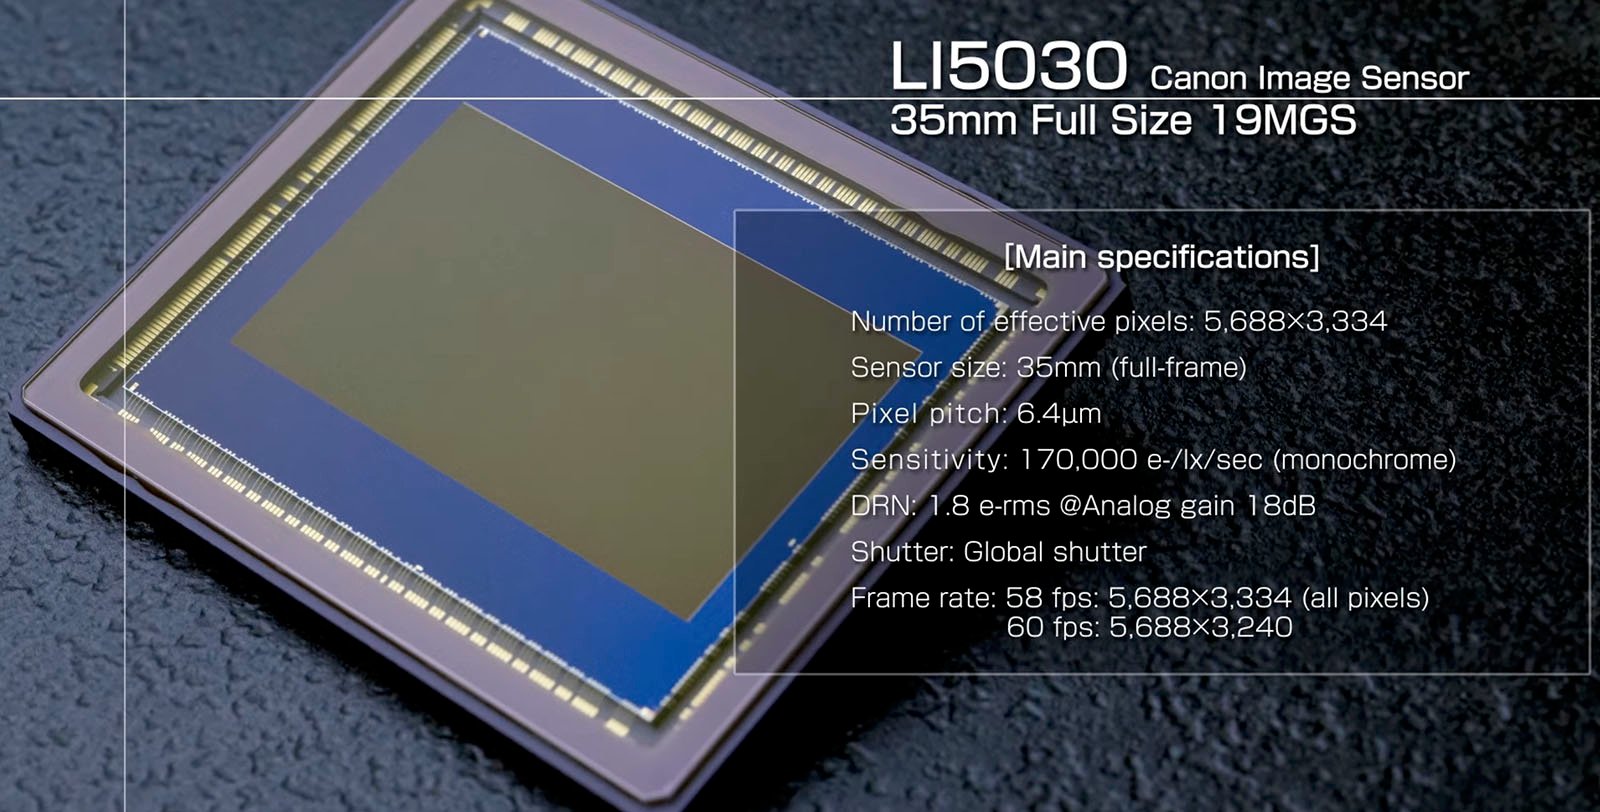 Exposed canon li5030 image sensor with specifications labeled, such as effective pixels, sensor size, and frame rate, on a textured gray background.